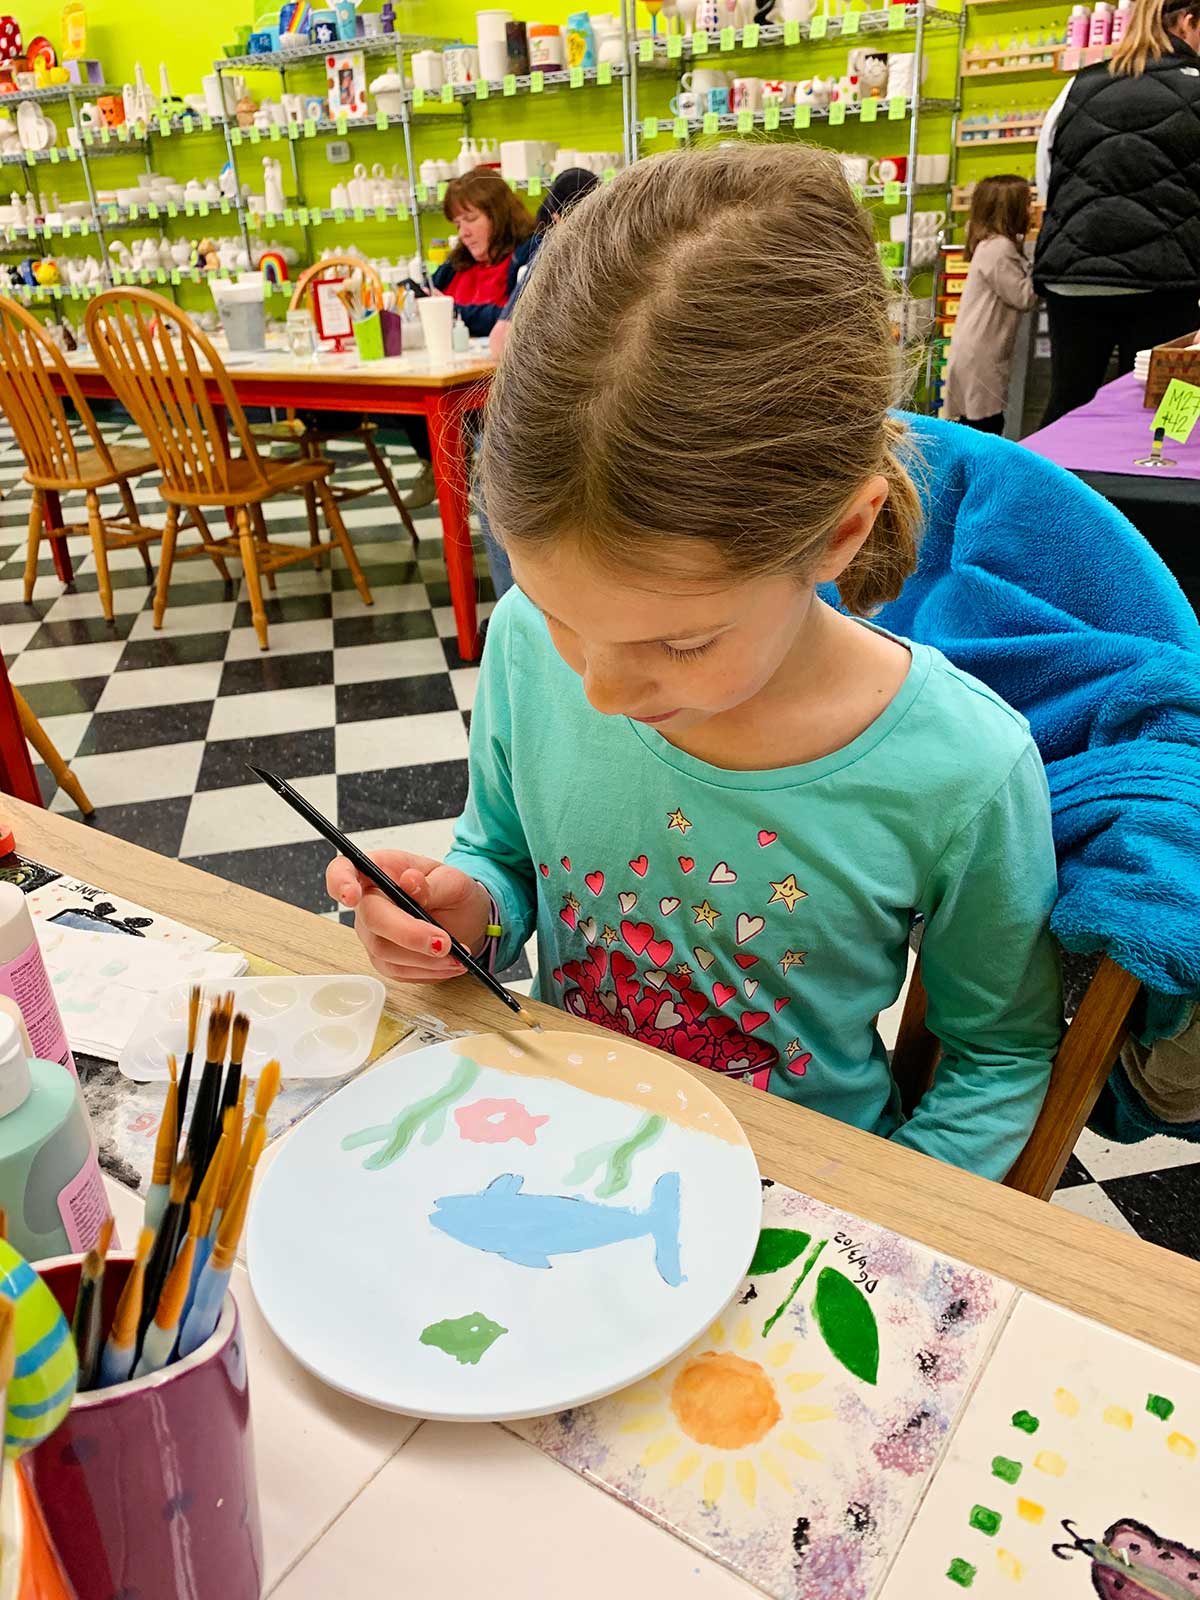 Young girl with light brown hair paints her plate at ceramic painting studio.